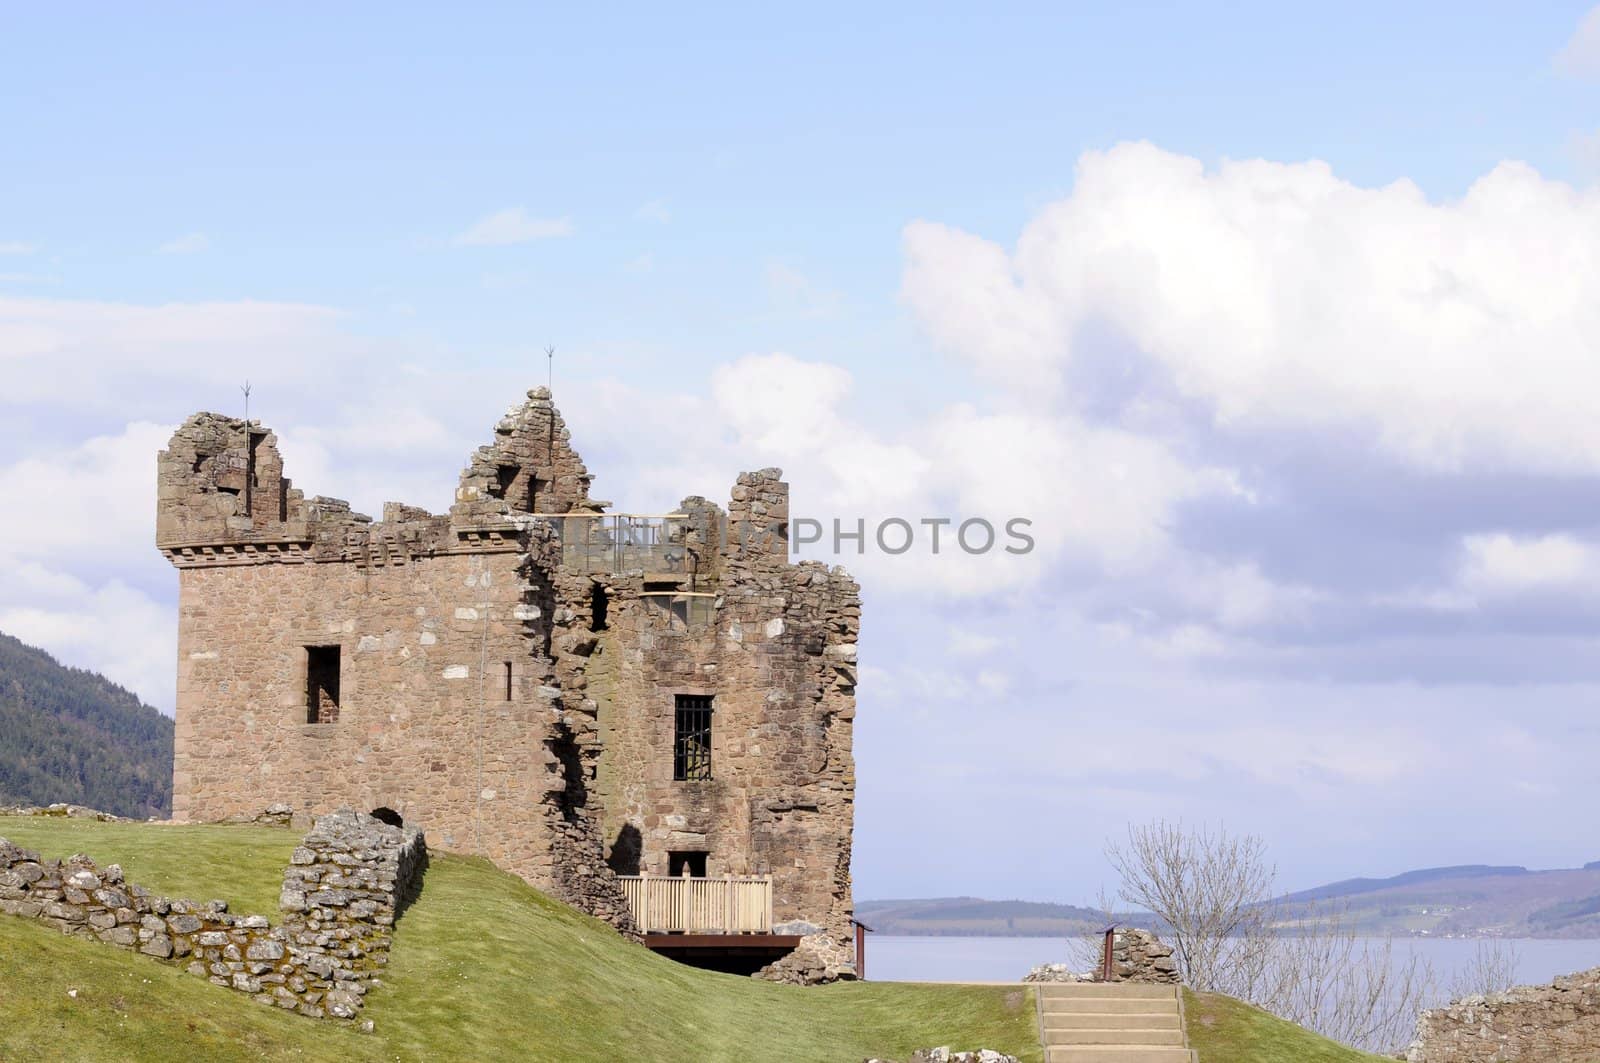 Urquhart castle on the edge of Loch Ness